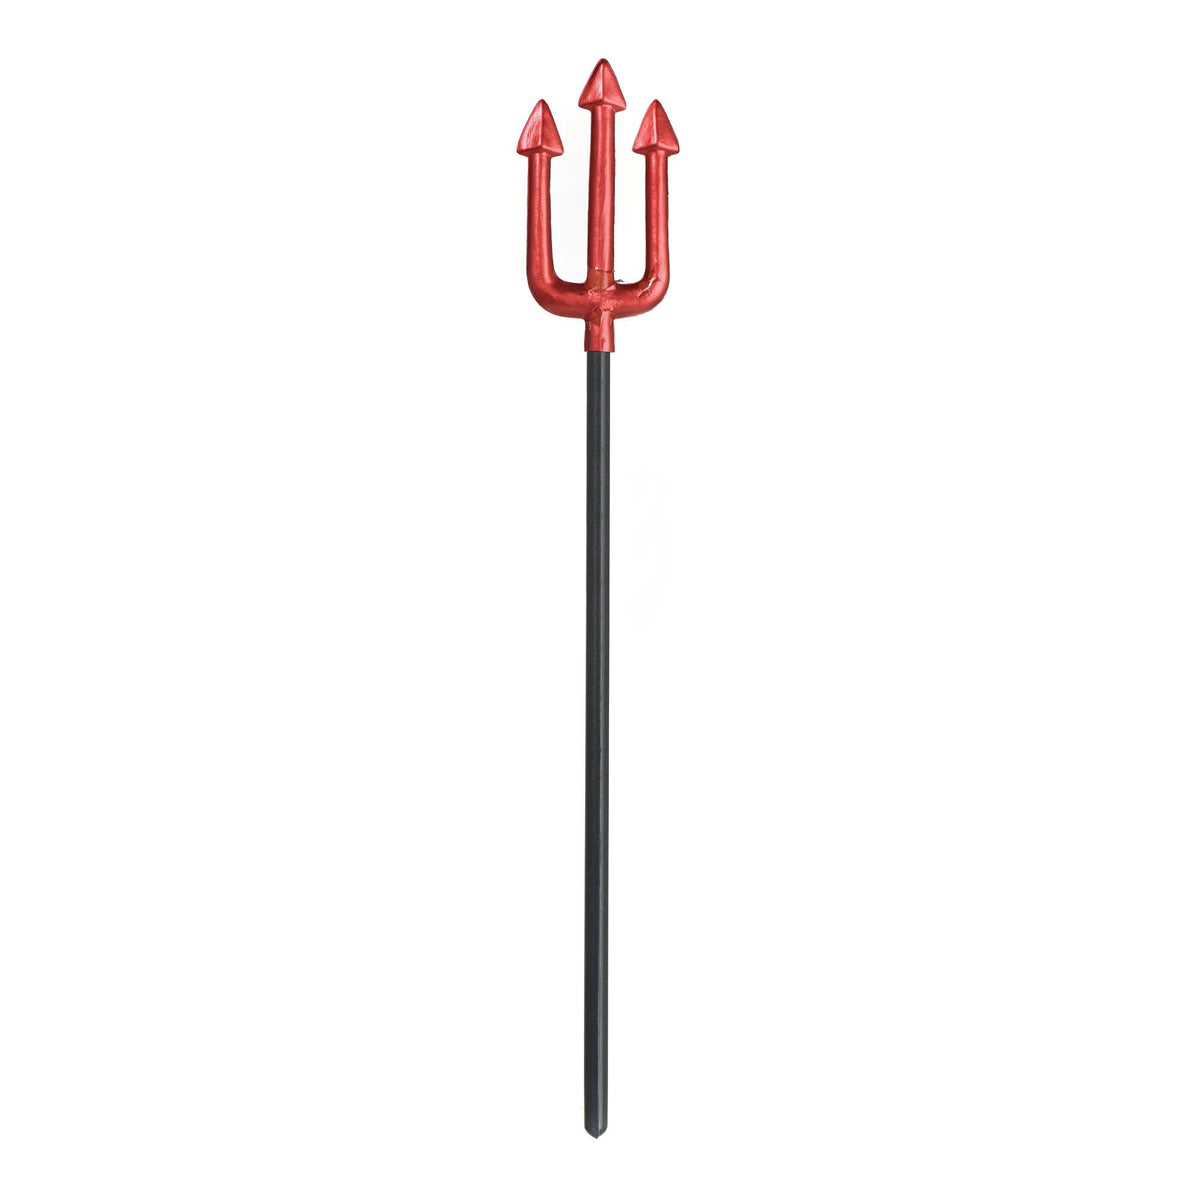 SUIT YOURSELF COSTUME CO. Costume Accessories Metallic Red Pitchfork 192937188484